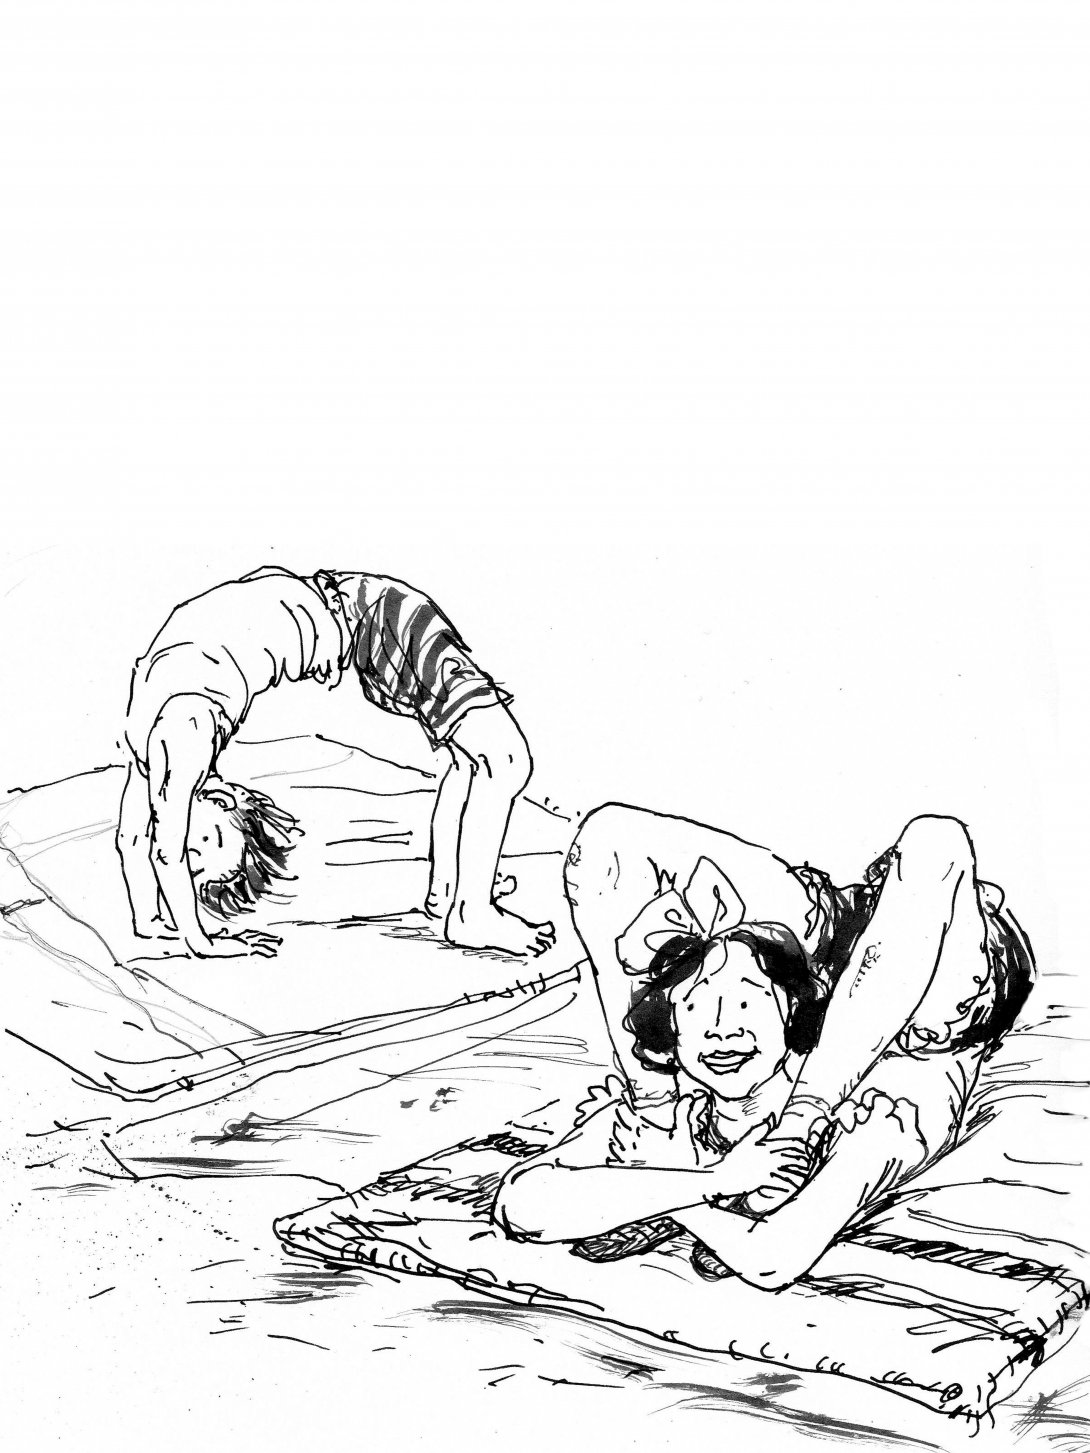 Sketch of two kids on small mats contorting themselves. One is in 'bridge' position with their hands and feet on the ground and holding their chest and hips up, while the other has her ankles over her shoulders under her chin with